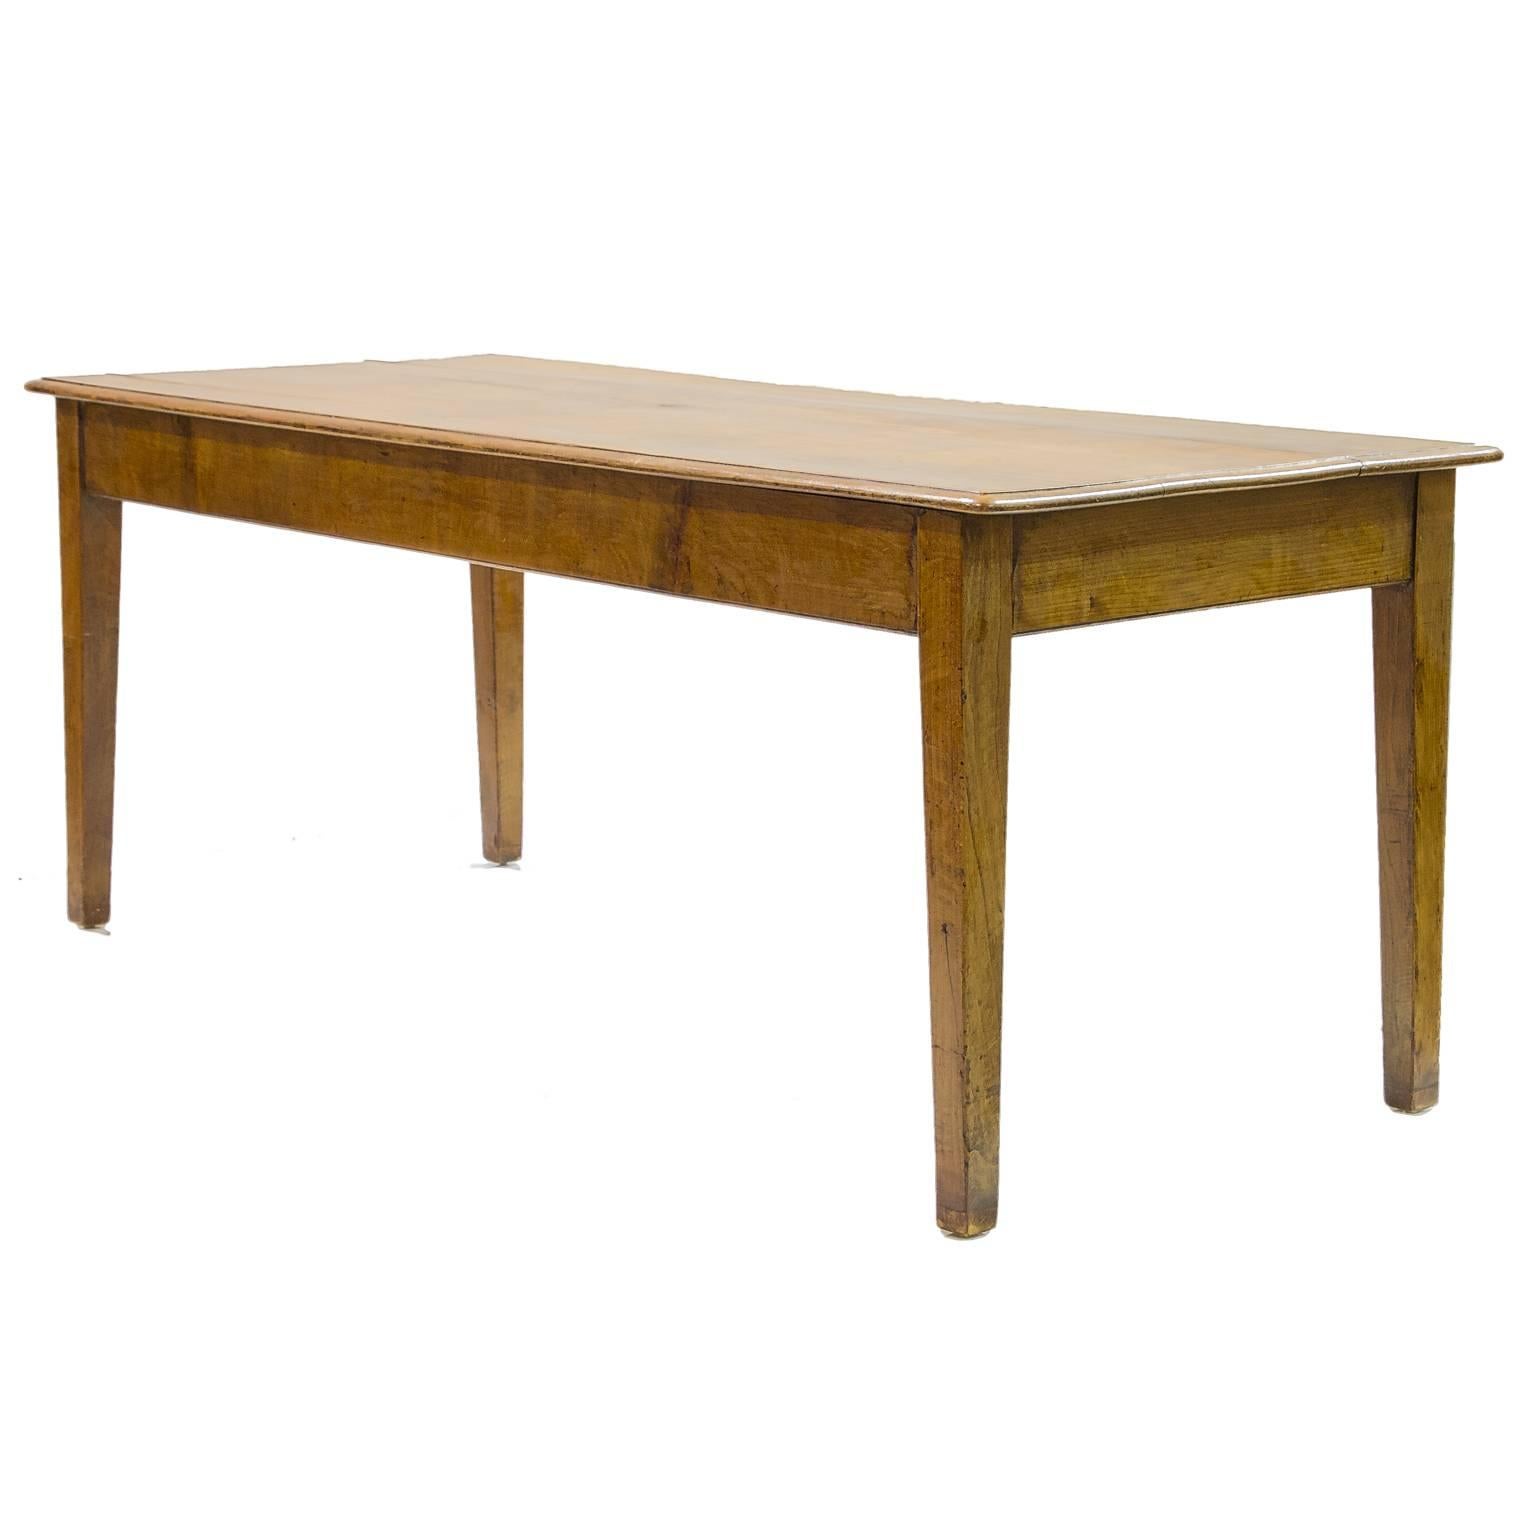 19th Century French Farm Table Made from Elmwood